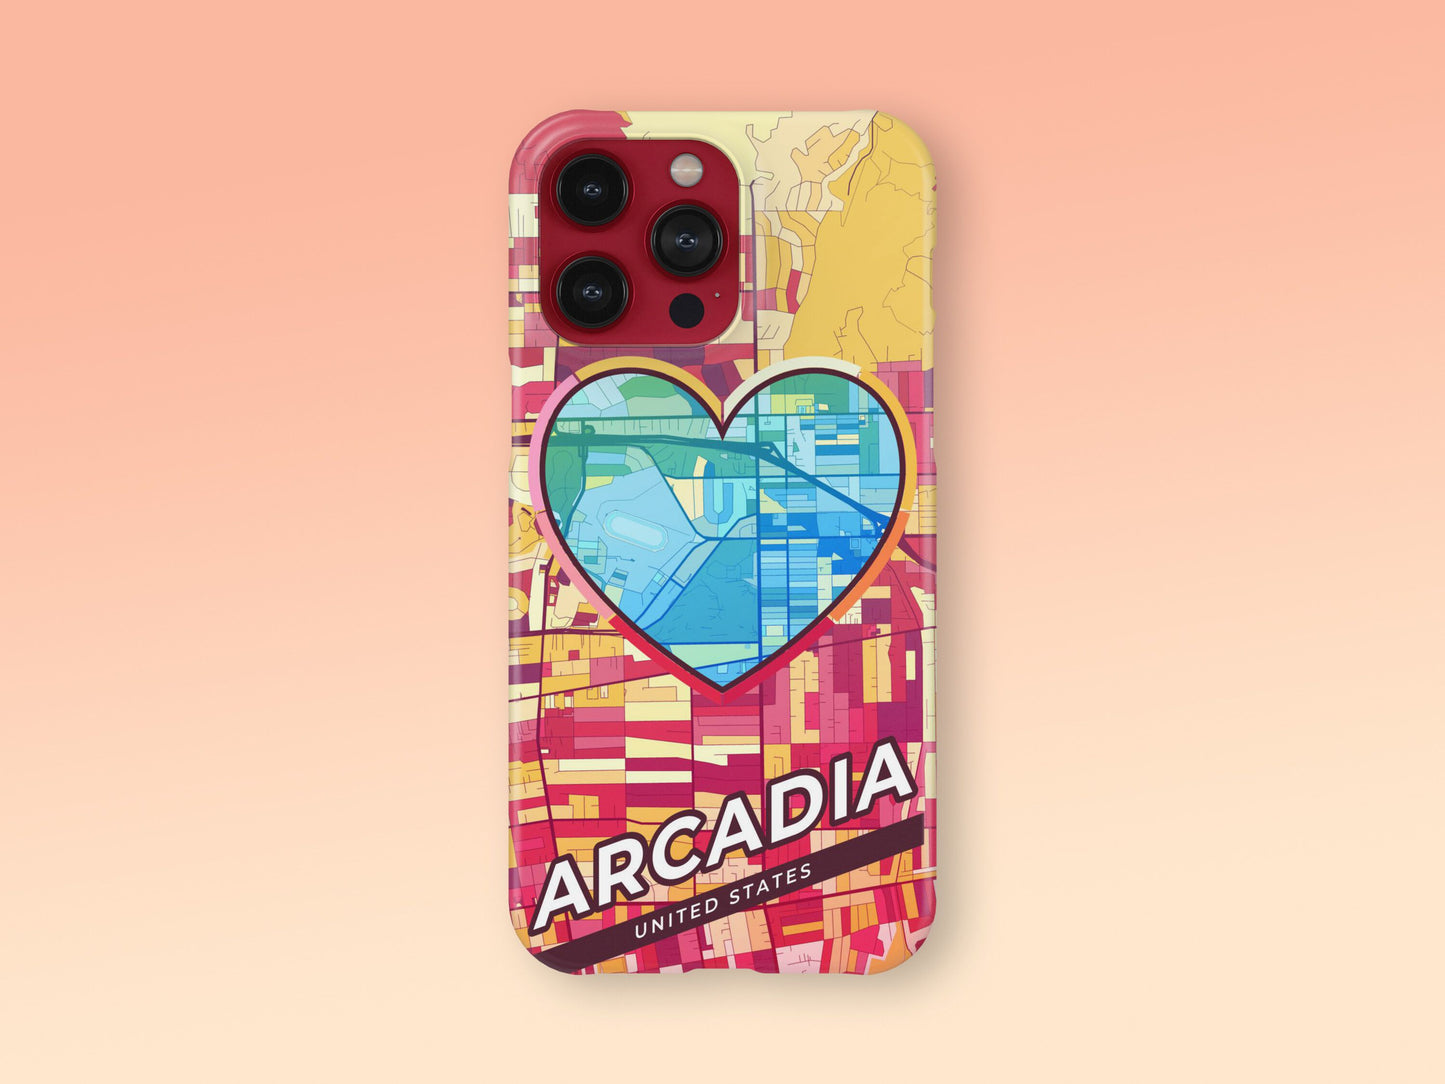 Arcadia California slim phone case with colorful icon. Birthday, wedding or housewarming gift. Couple match cases. 2